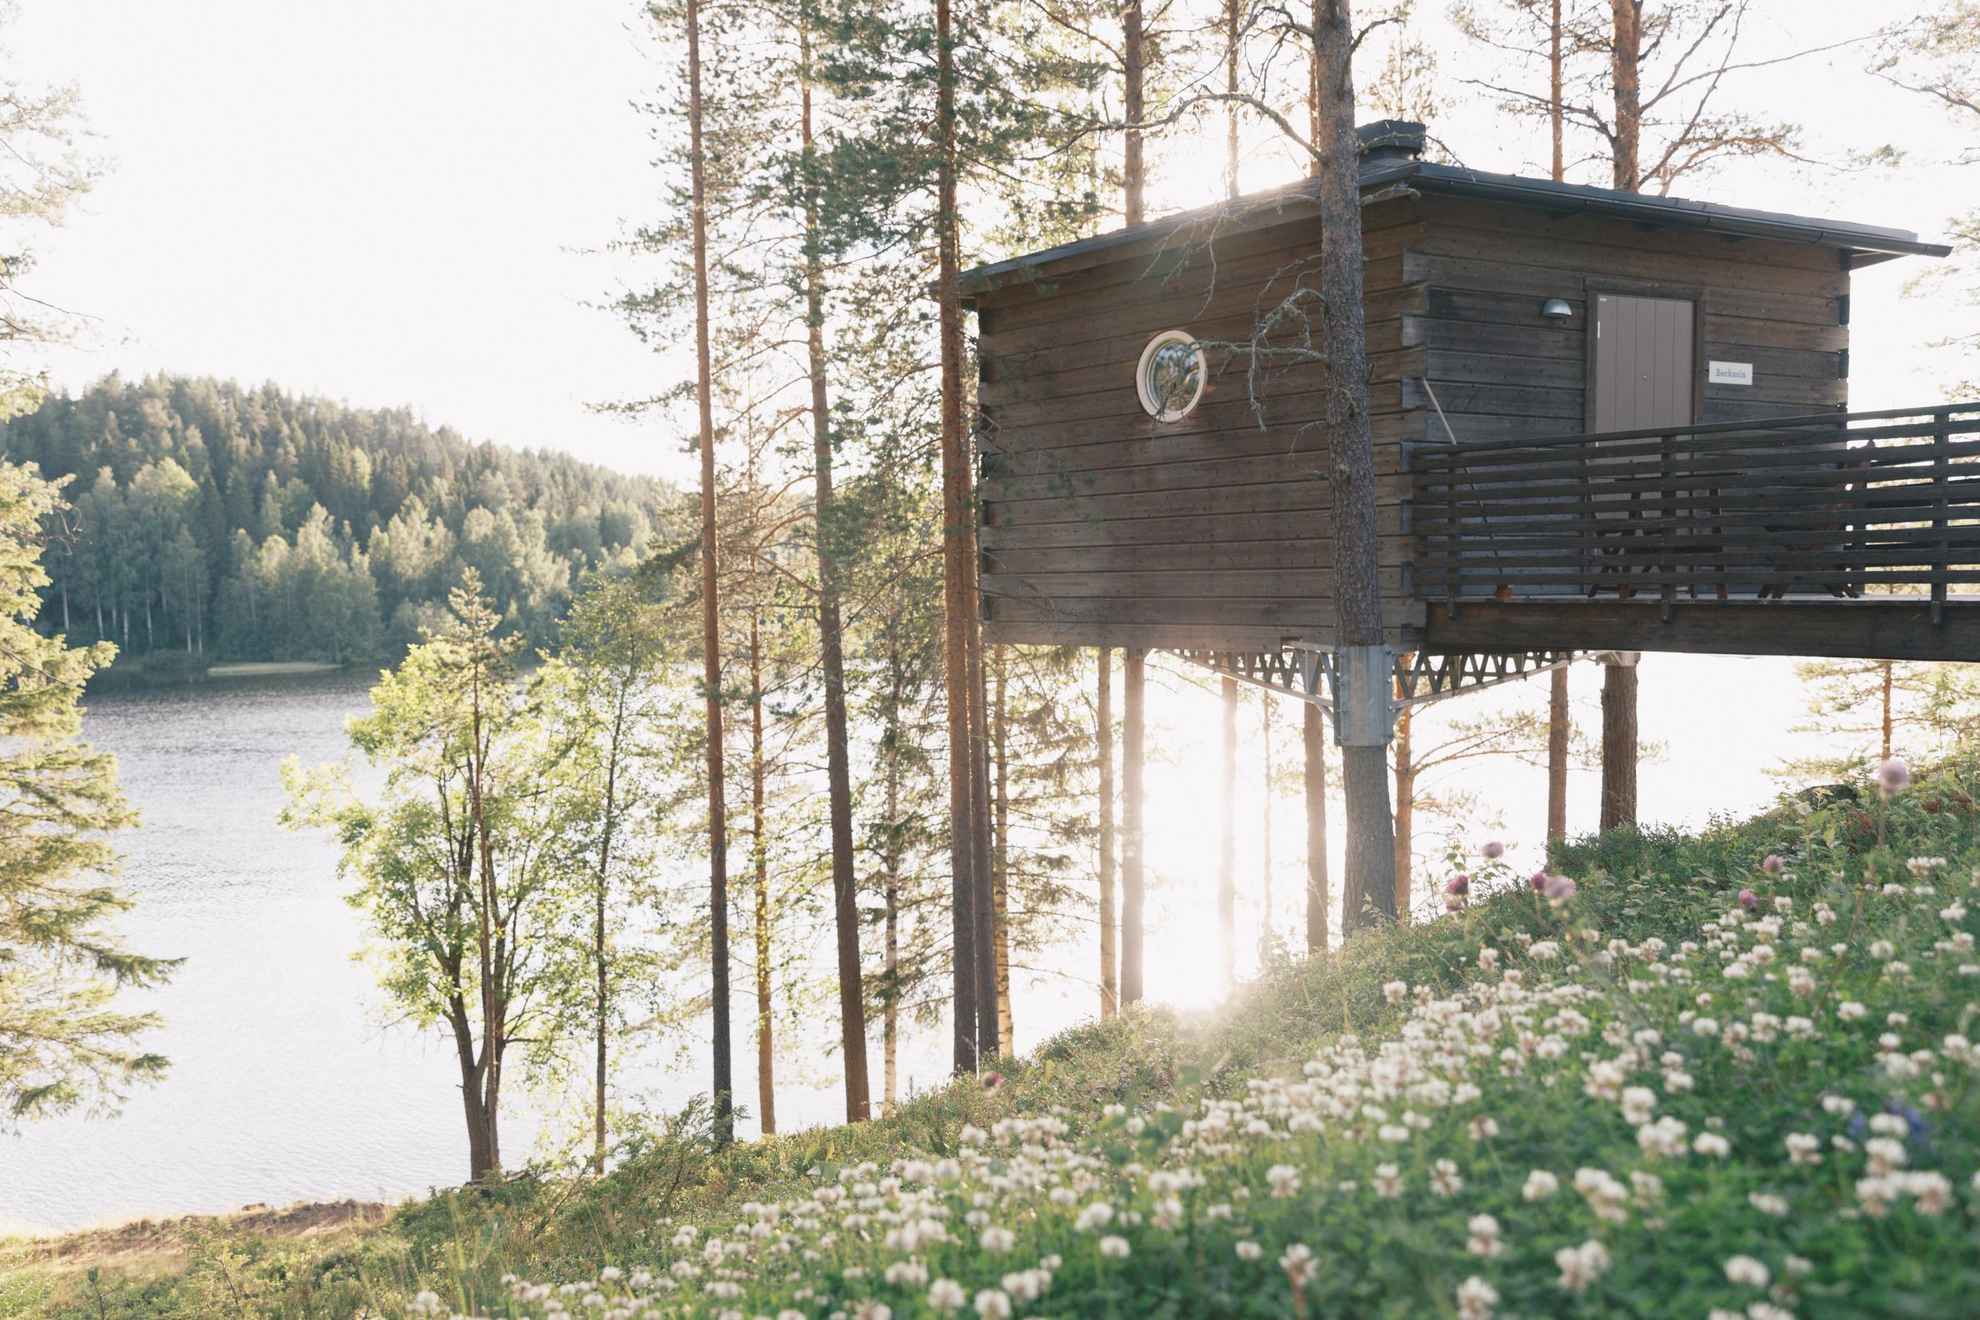 A tree house by a river during spring. Wood anemones is in the foreground.